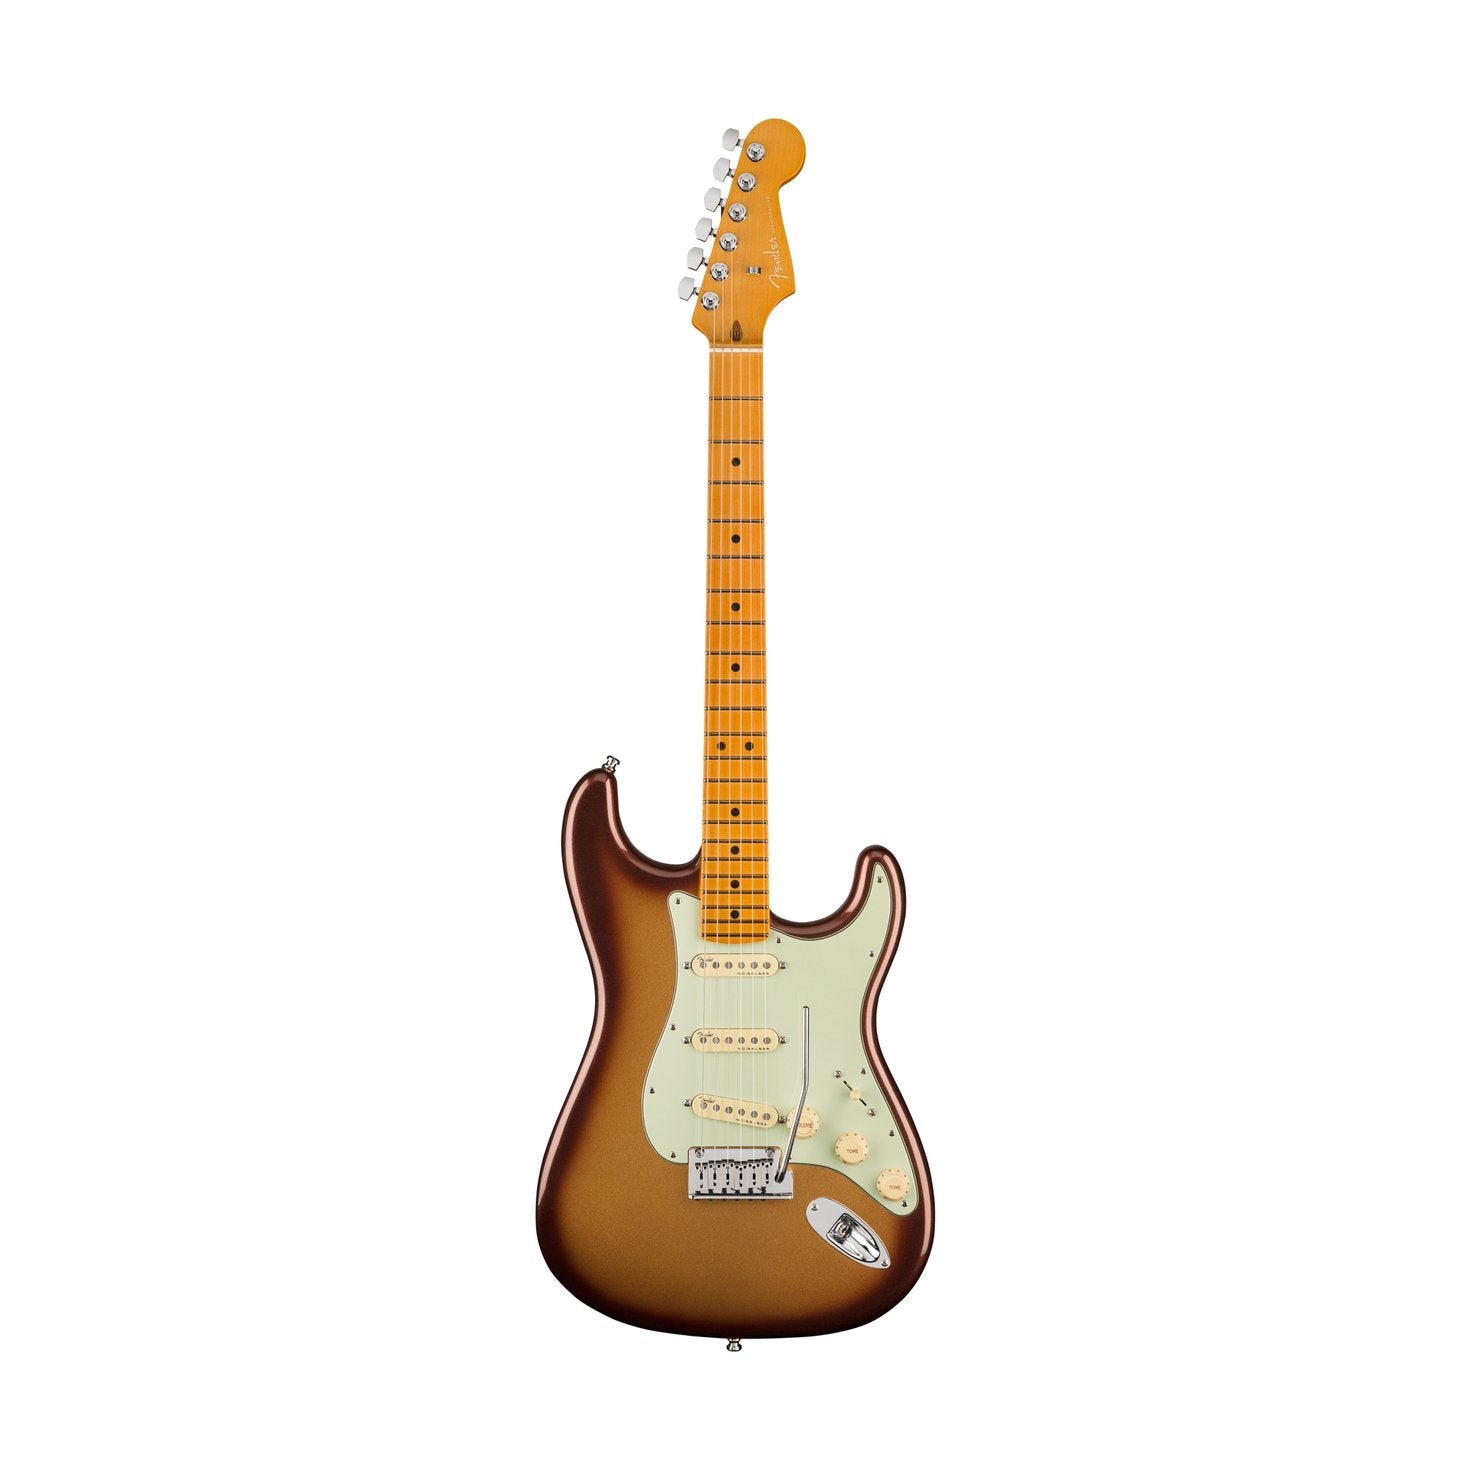 Fender American Ultra Stratocaster Electric Guitar, Maple FB, Mocha Burst, FENDER, ELECTRIC GUITAR, fender-electric-guitar-f03-011-8012-732, ZOSO MUSIC SDN BHD